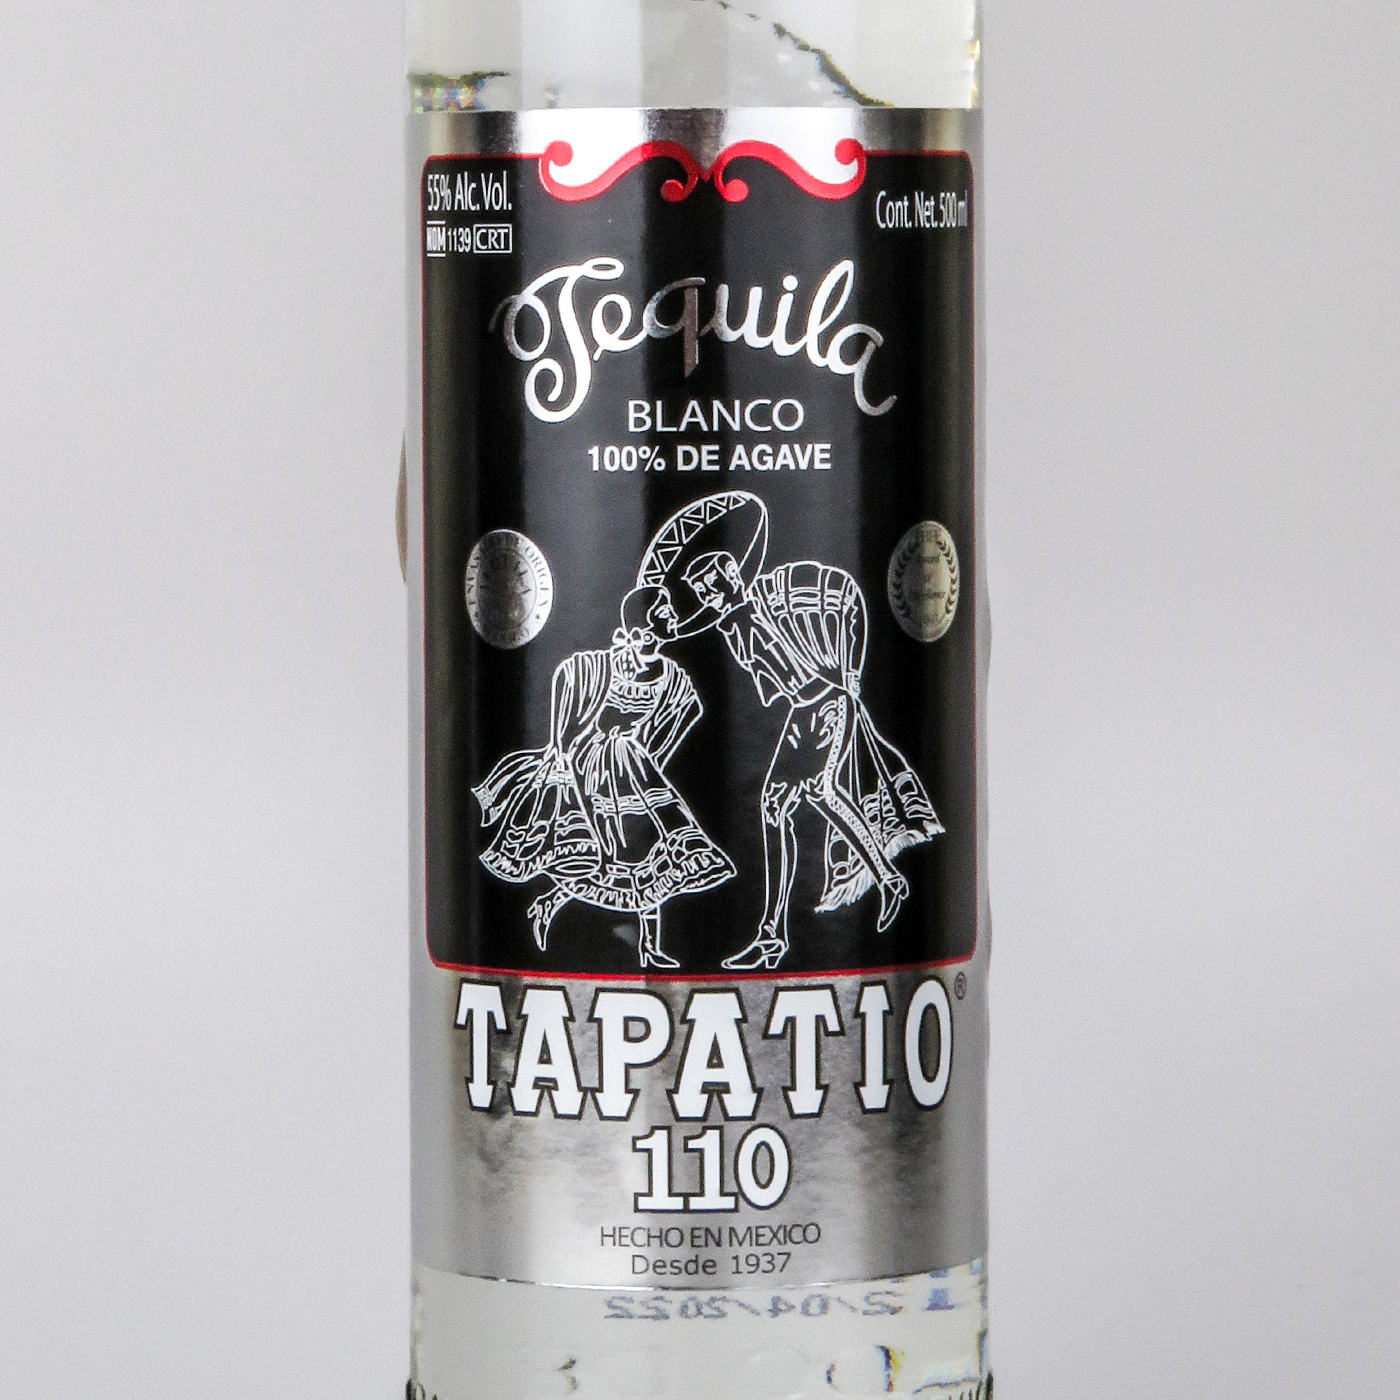 Tapatio 100 front - product image